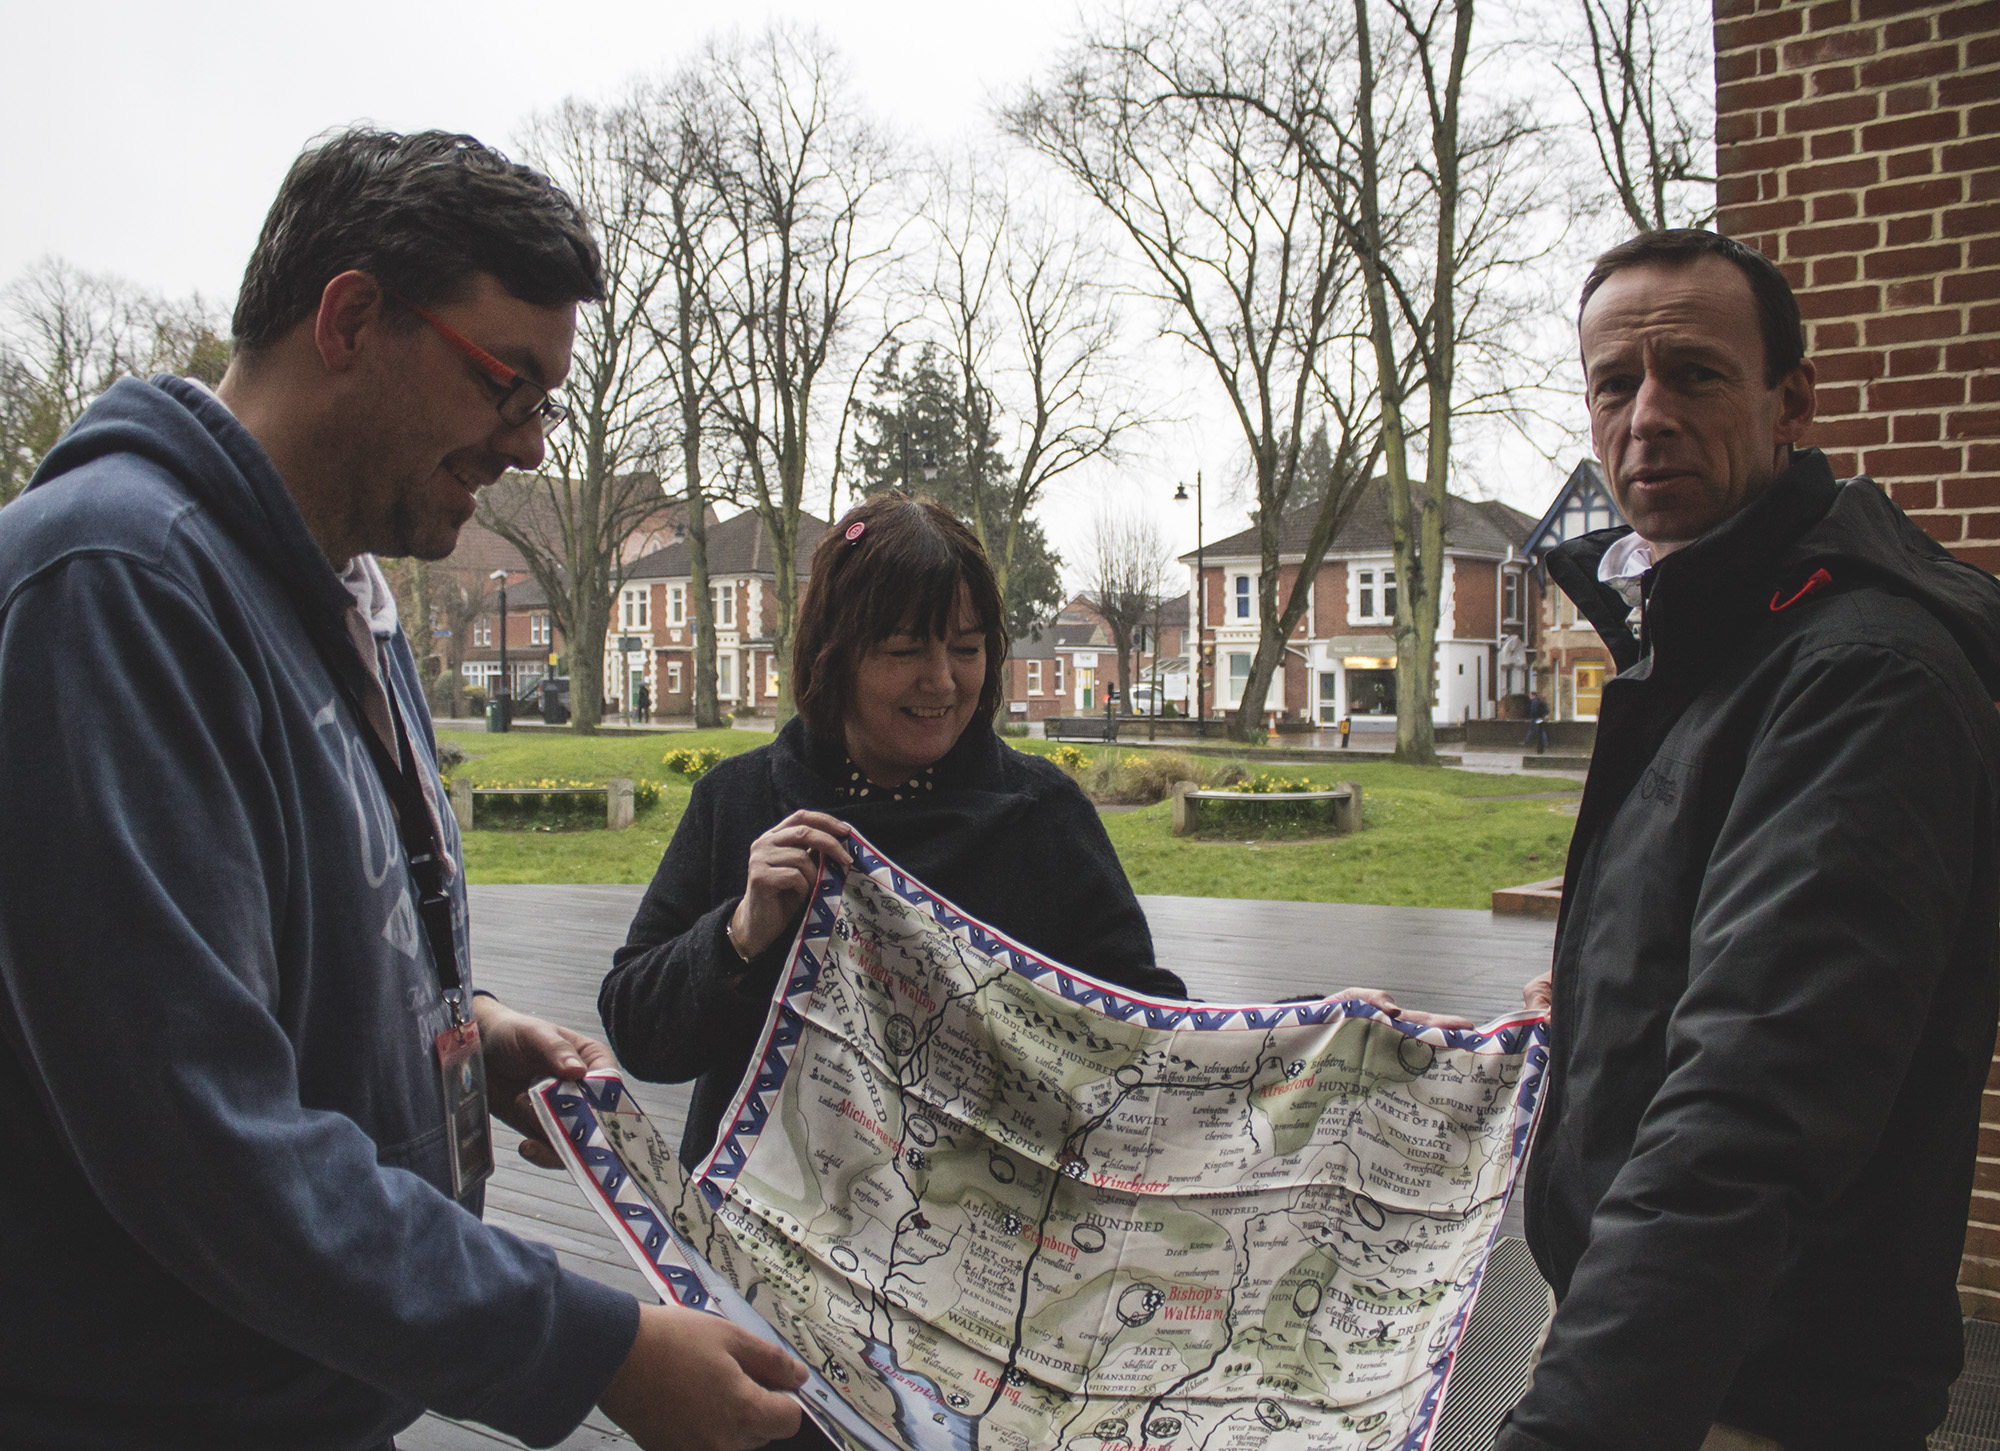 Commemorative Interactive Map To Be Launched At Hamble Festival